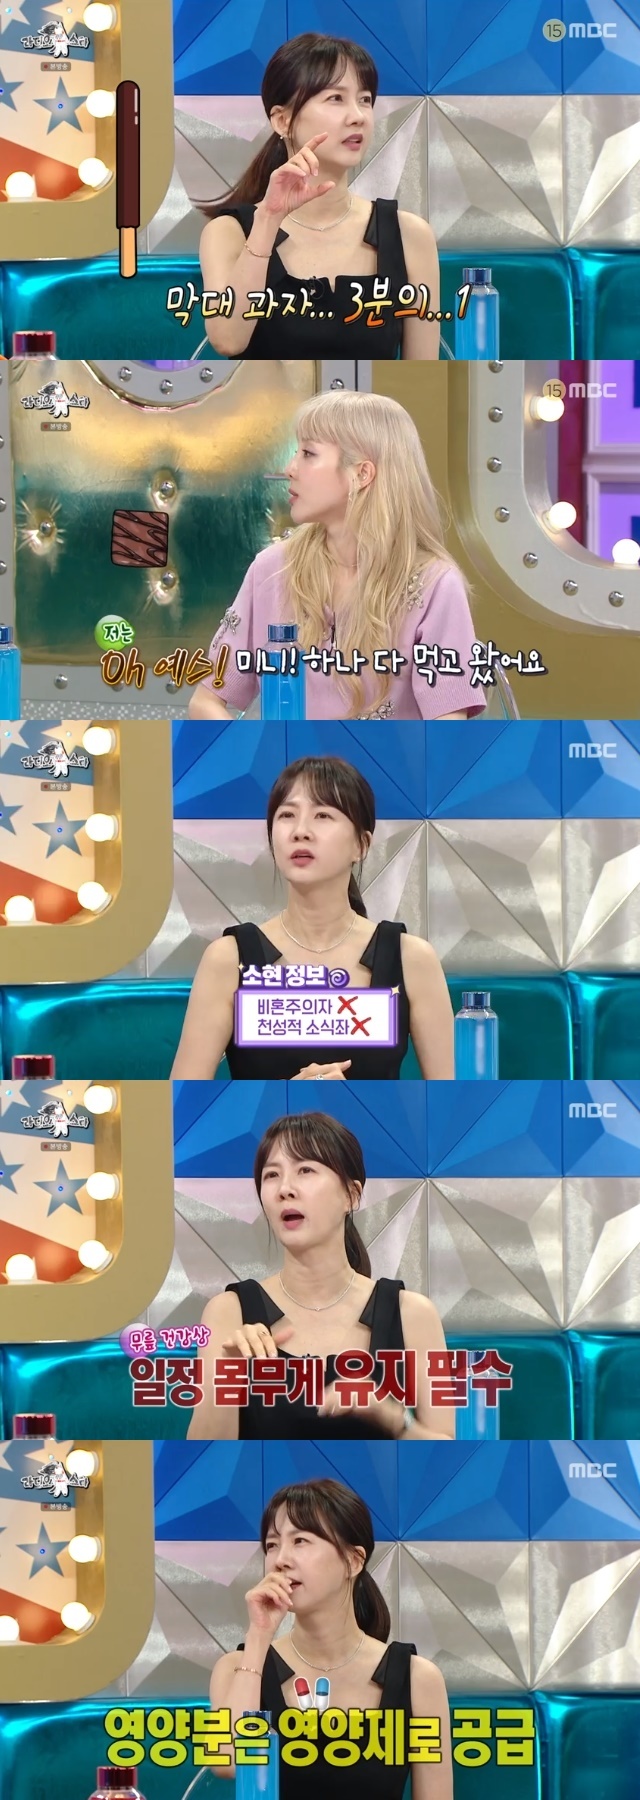 Broadcaster Park So-hyun revealed the real reason for becoming a news left.Park So-hyun, Park Hyo-joo, Sandara Park, and Leo Jay appeared as guests in the 830th MBC entertainment show Radio Star (hereinafter referred to as Radio Star) broadcast on August 16th.On this day, Park So-hyun expressed his firm belief that I try to eat better food than instant because I can not eat a lot. For example, when I eat tuna sashimi, I eat only belly fat and beef.At this time, Park So-hyun added, I can only eat two or three points anyway.Gim Gu-ra asked, Did you eat a lot of Vallejo? Park So-hyun said, When I was in my 20s, I ate more and exercised more.As I grew older, the amount gradually decreased and became like now. I ate a lot more at Sandara Park age. Sandara Park, however, reacted unbelievably and revealed that Park So-hyun had eaten only one-third of the sticks during the break, saying, I have eaten one Oyes mini.I am one of the news left, Jasin appealed to Park So-hyun.Then Park So-hyun said, I bind Sandara Park to the same news left, and Daraa wants to increase but can not eat it. I do not want to increase it.Park So-hyun, who nailed that Jasin was not a natural news left, said, I have been in Celebrity for a lifetime when I was in Vallejo.If you gain weight, your ligaments wont hold up, so you have to have surgery. You have to fit in at 47 kilograms now, he explained.When asked about the problem of nutrient intake, he said, Every six months, I get a blood test. I got the results of the test last week, and they said it was very good. Most of them supply nutrients with medicine. They say they have good fuel economy.